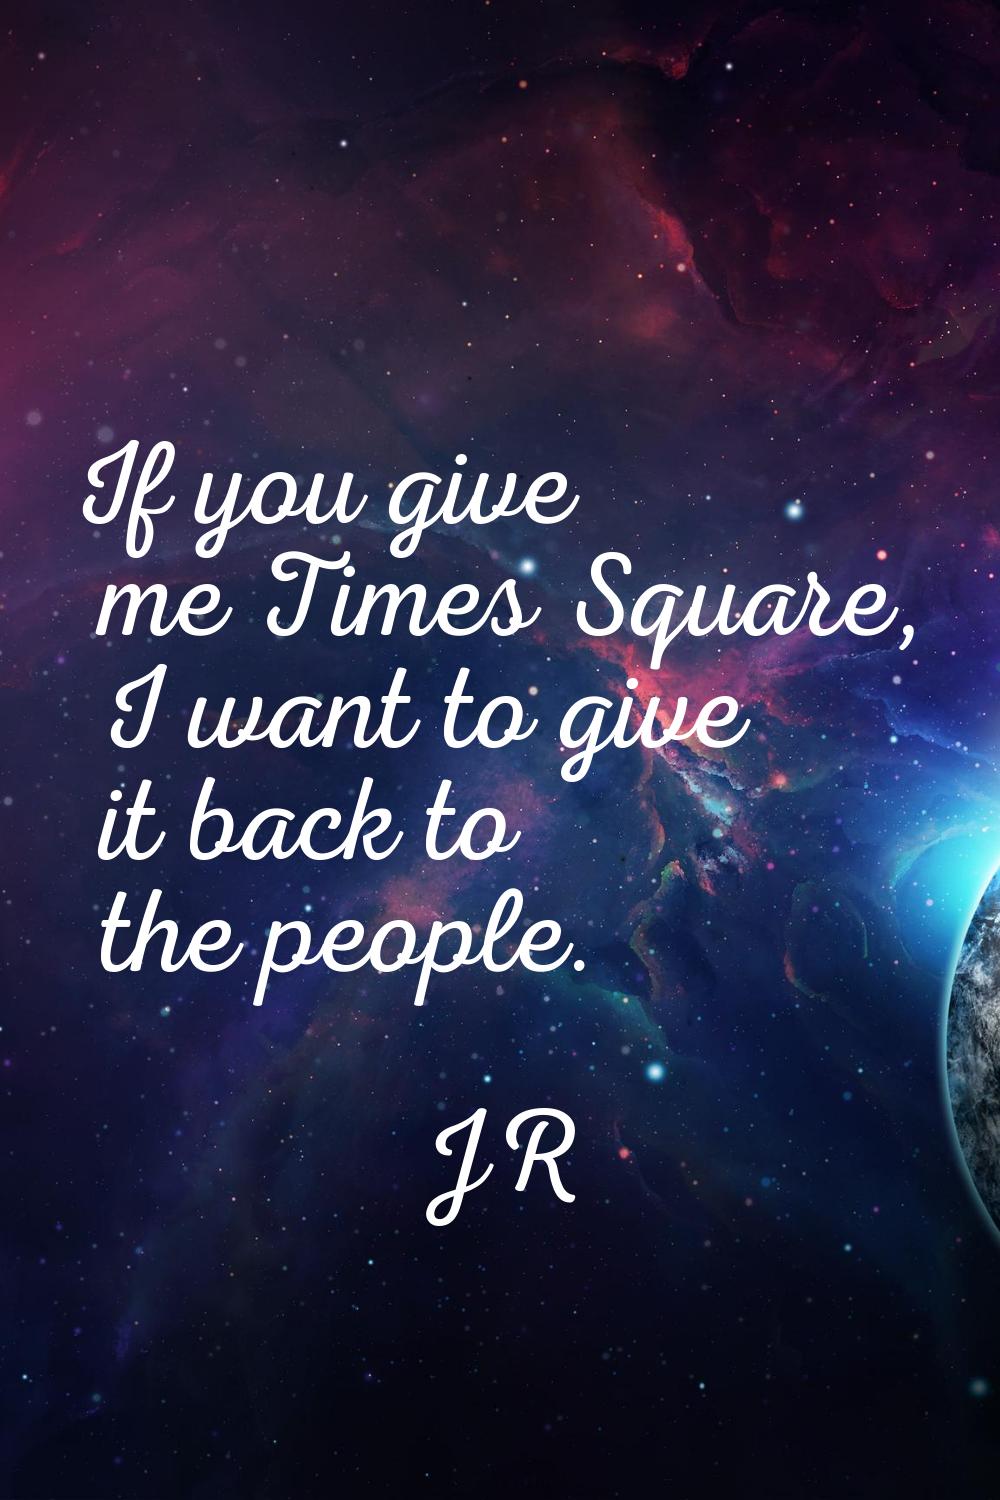 If you give me Times Square, I want to give it back to the people.